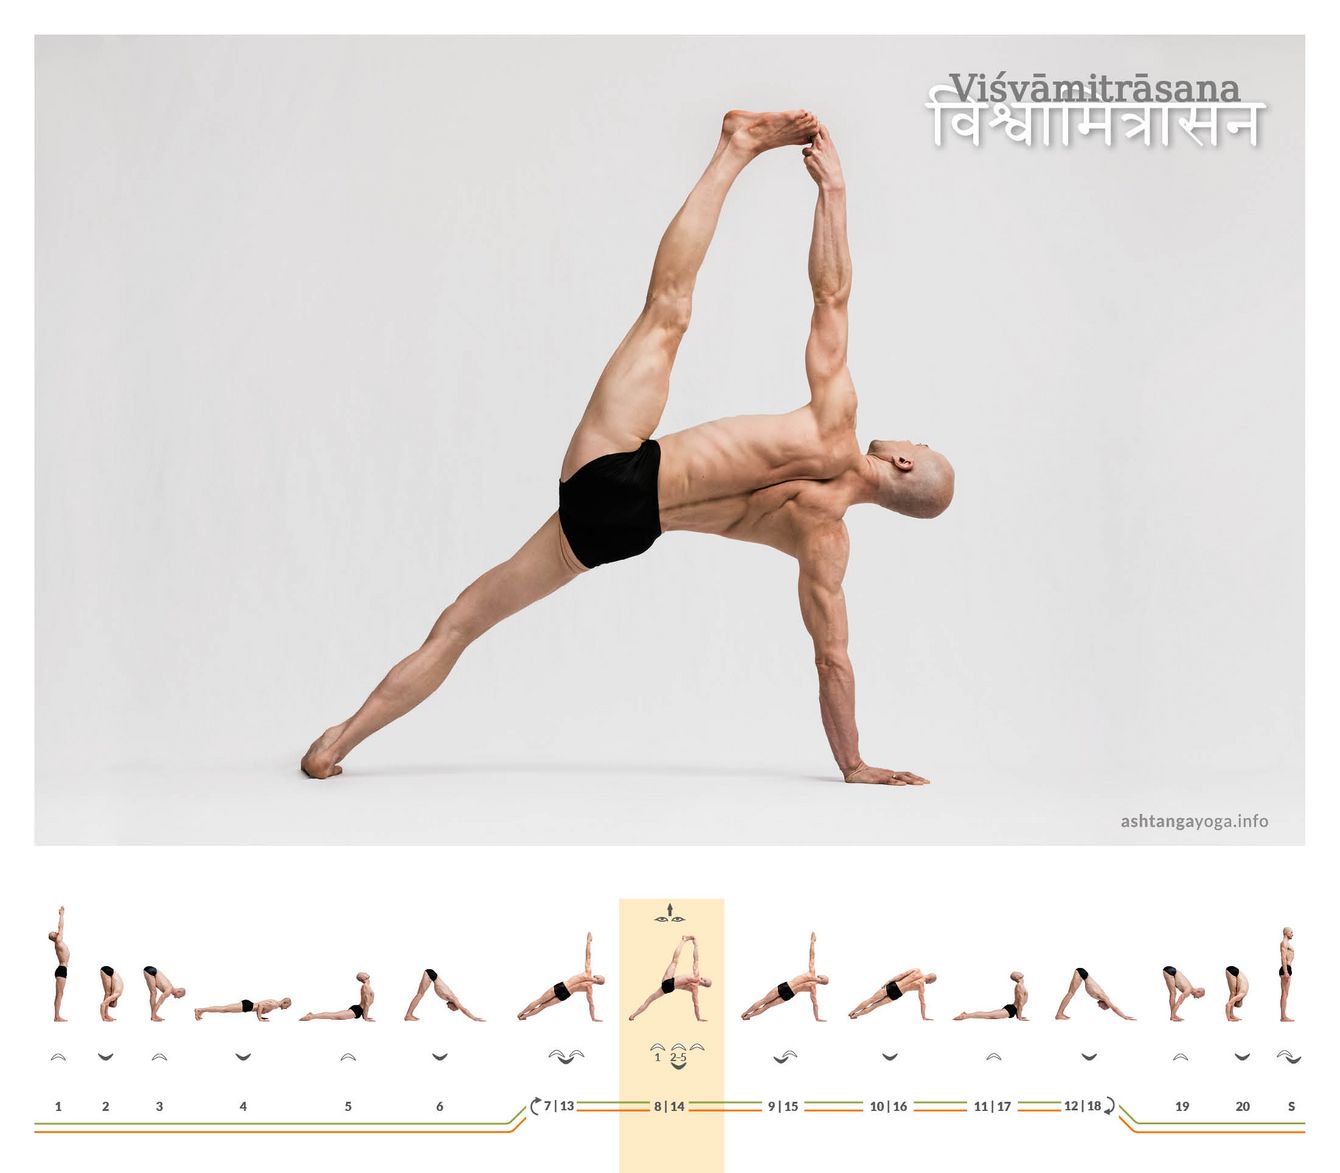 The "Pose Named after Vi"asishtha" is a powerful side plank pose where the arm and leg of the not supporting side gracefully reach towards the sky.